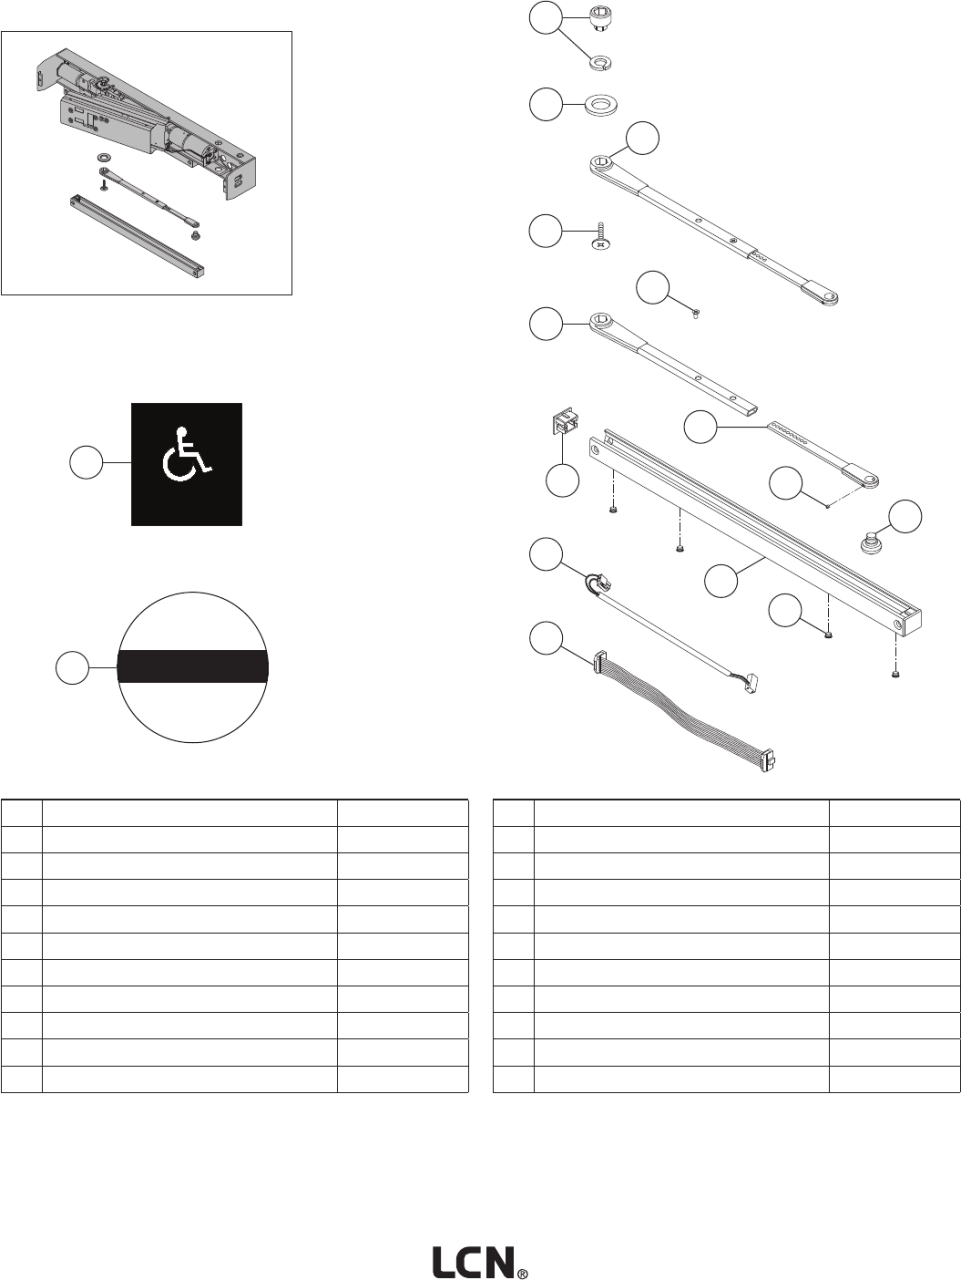 LCN Illustrated Parts Guide LCNIllustrated